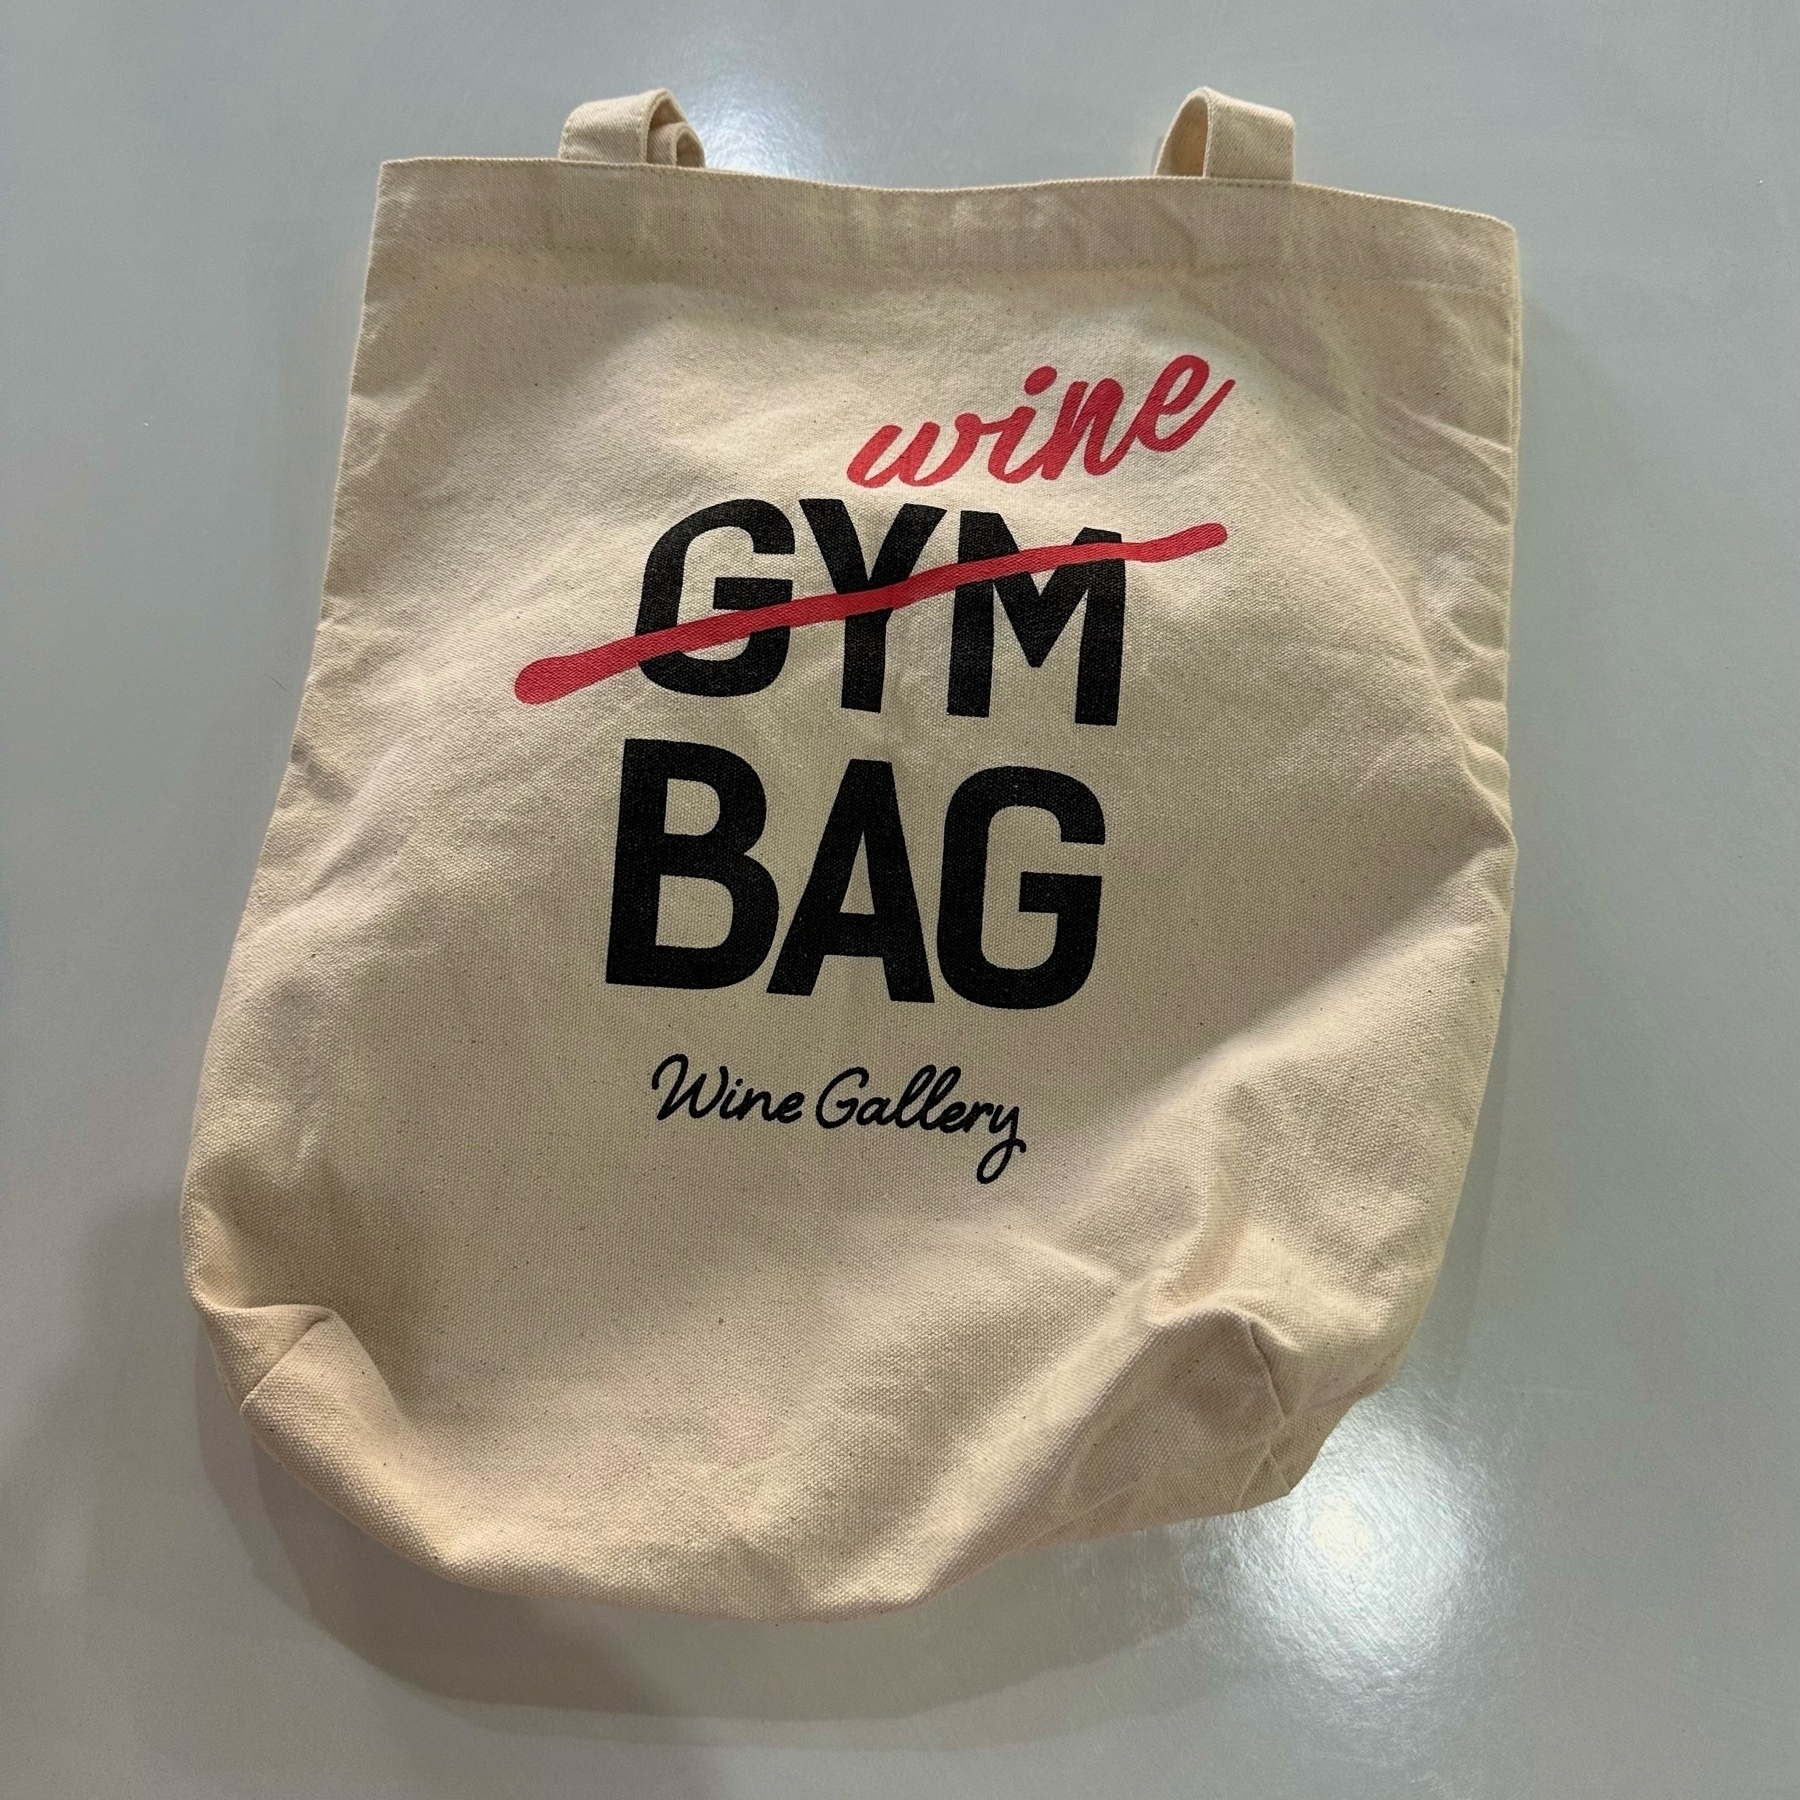 A white cotton bag. Printed on one side is "GYM BAG" with a red line through gym and wine written in red above it. In smaller lettering is "Wine Gallery".